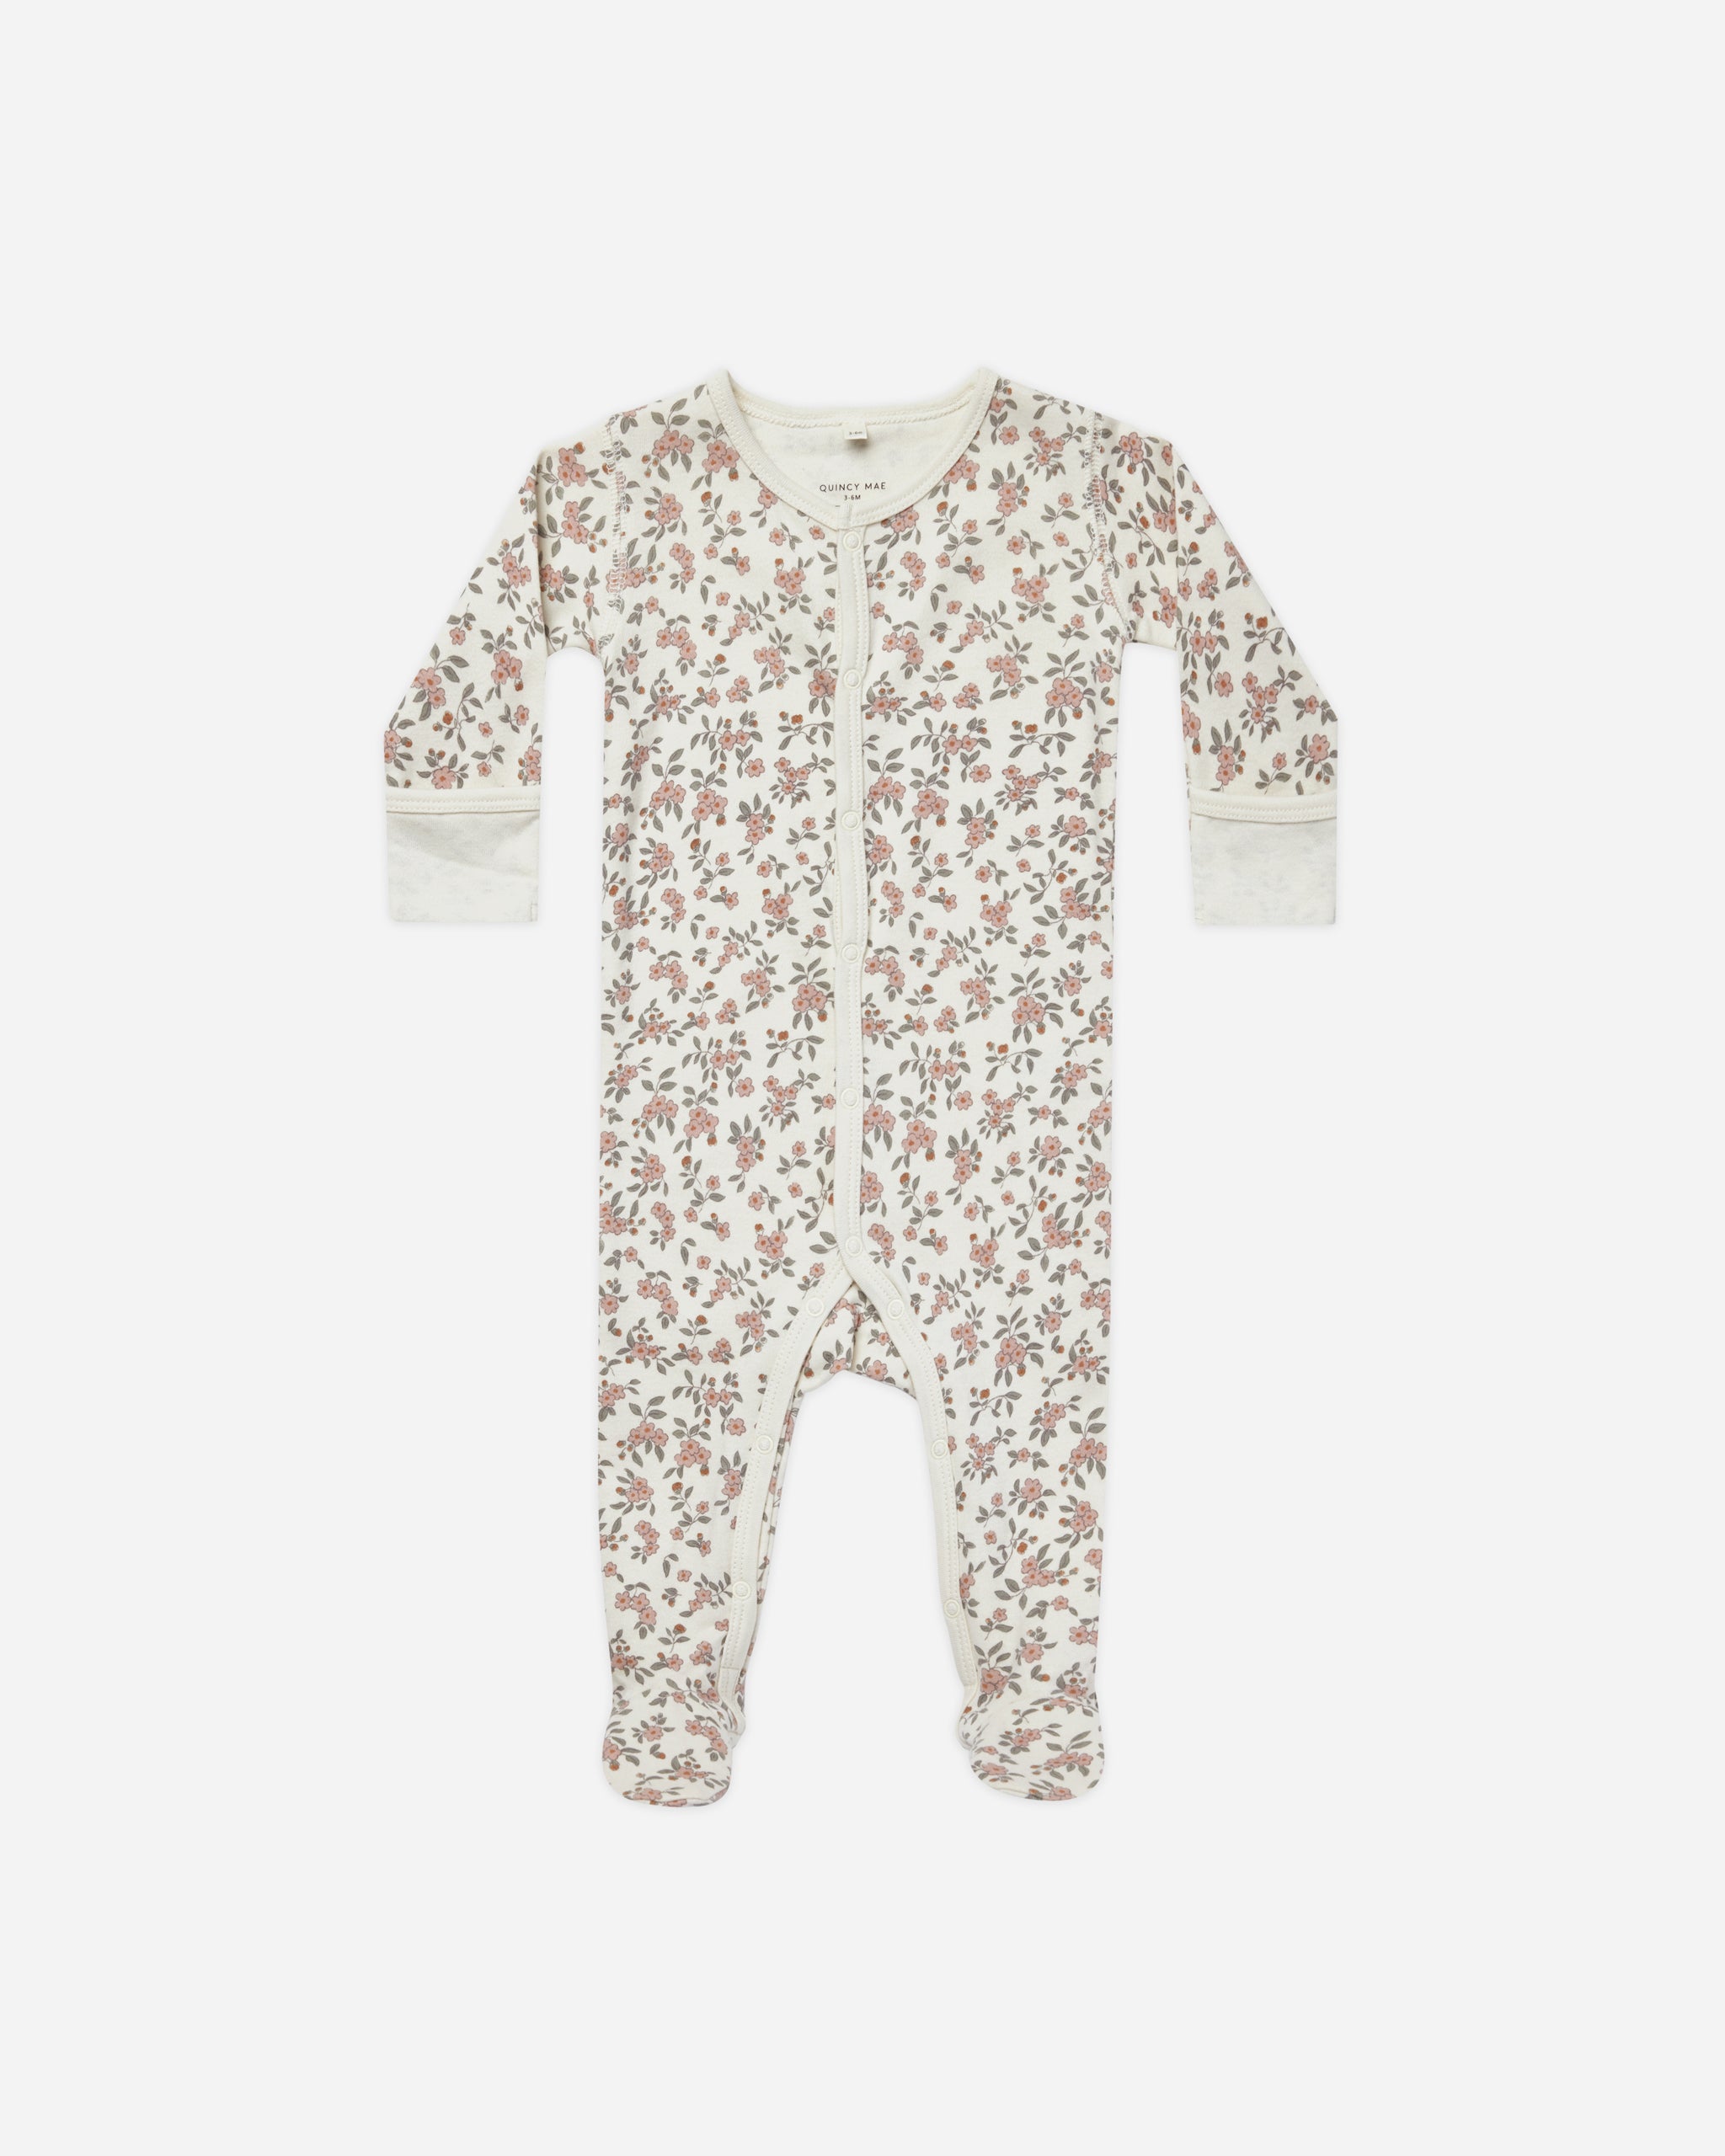 Full Snap Footie || Meadow - Rylee + Cru | Kids Clothes | Trendy Baby Clothes | Modern Infant Outfits |